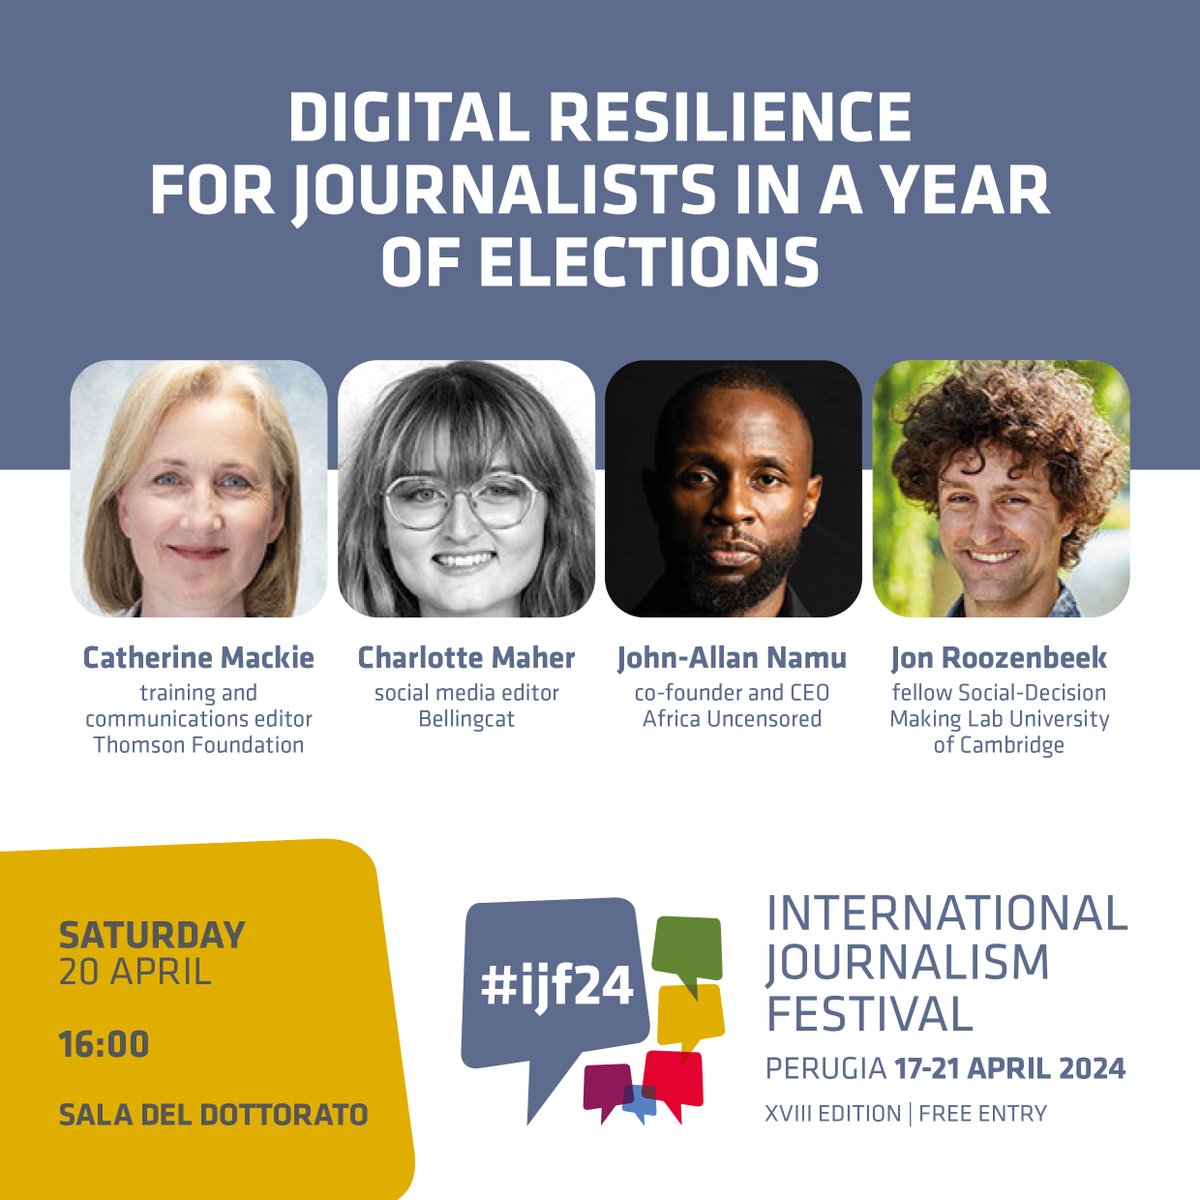 🔴SAVE THE DATE!
'Digital resilience for journalists in a year of elections'
#ijf24 with
@thomfound
@CharMaher
@johnallannamu
@roozenbot
📽️Live & On Demand > Sat, 20 Apr
journalismfestival.com/programme/2024…